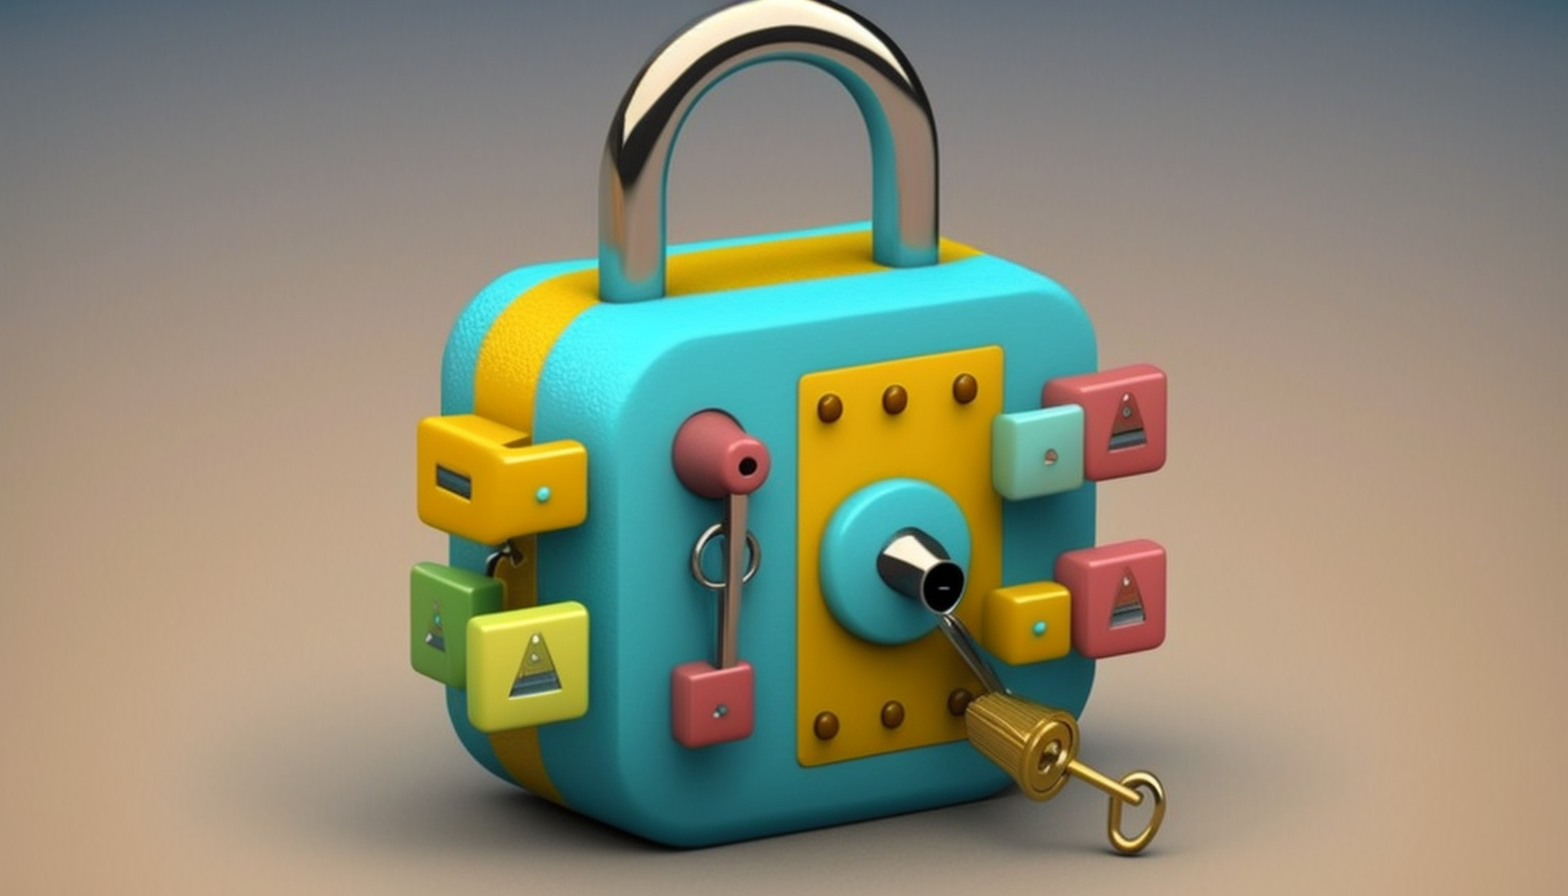 A cartoon padlock holding a set of keys, representing password management and security